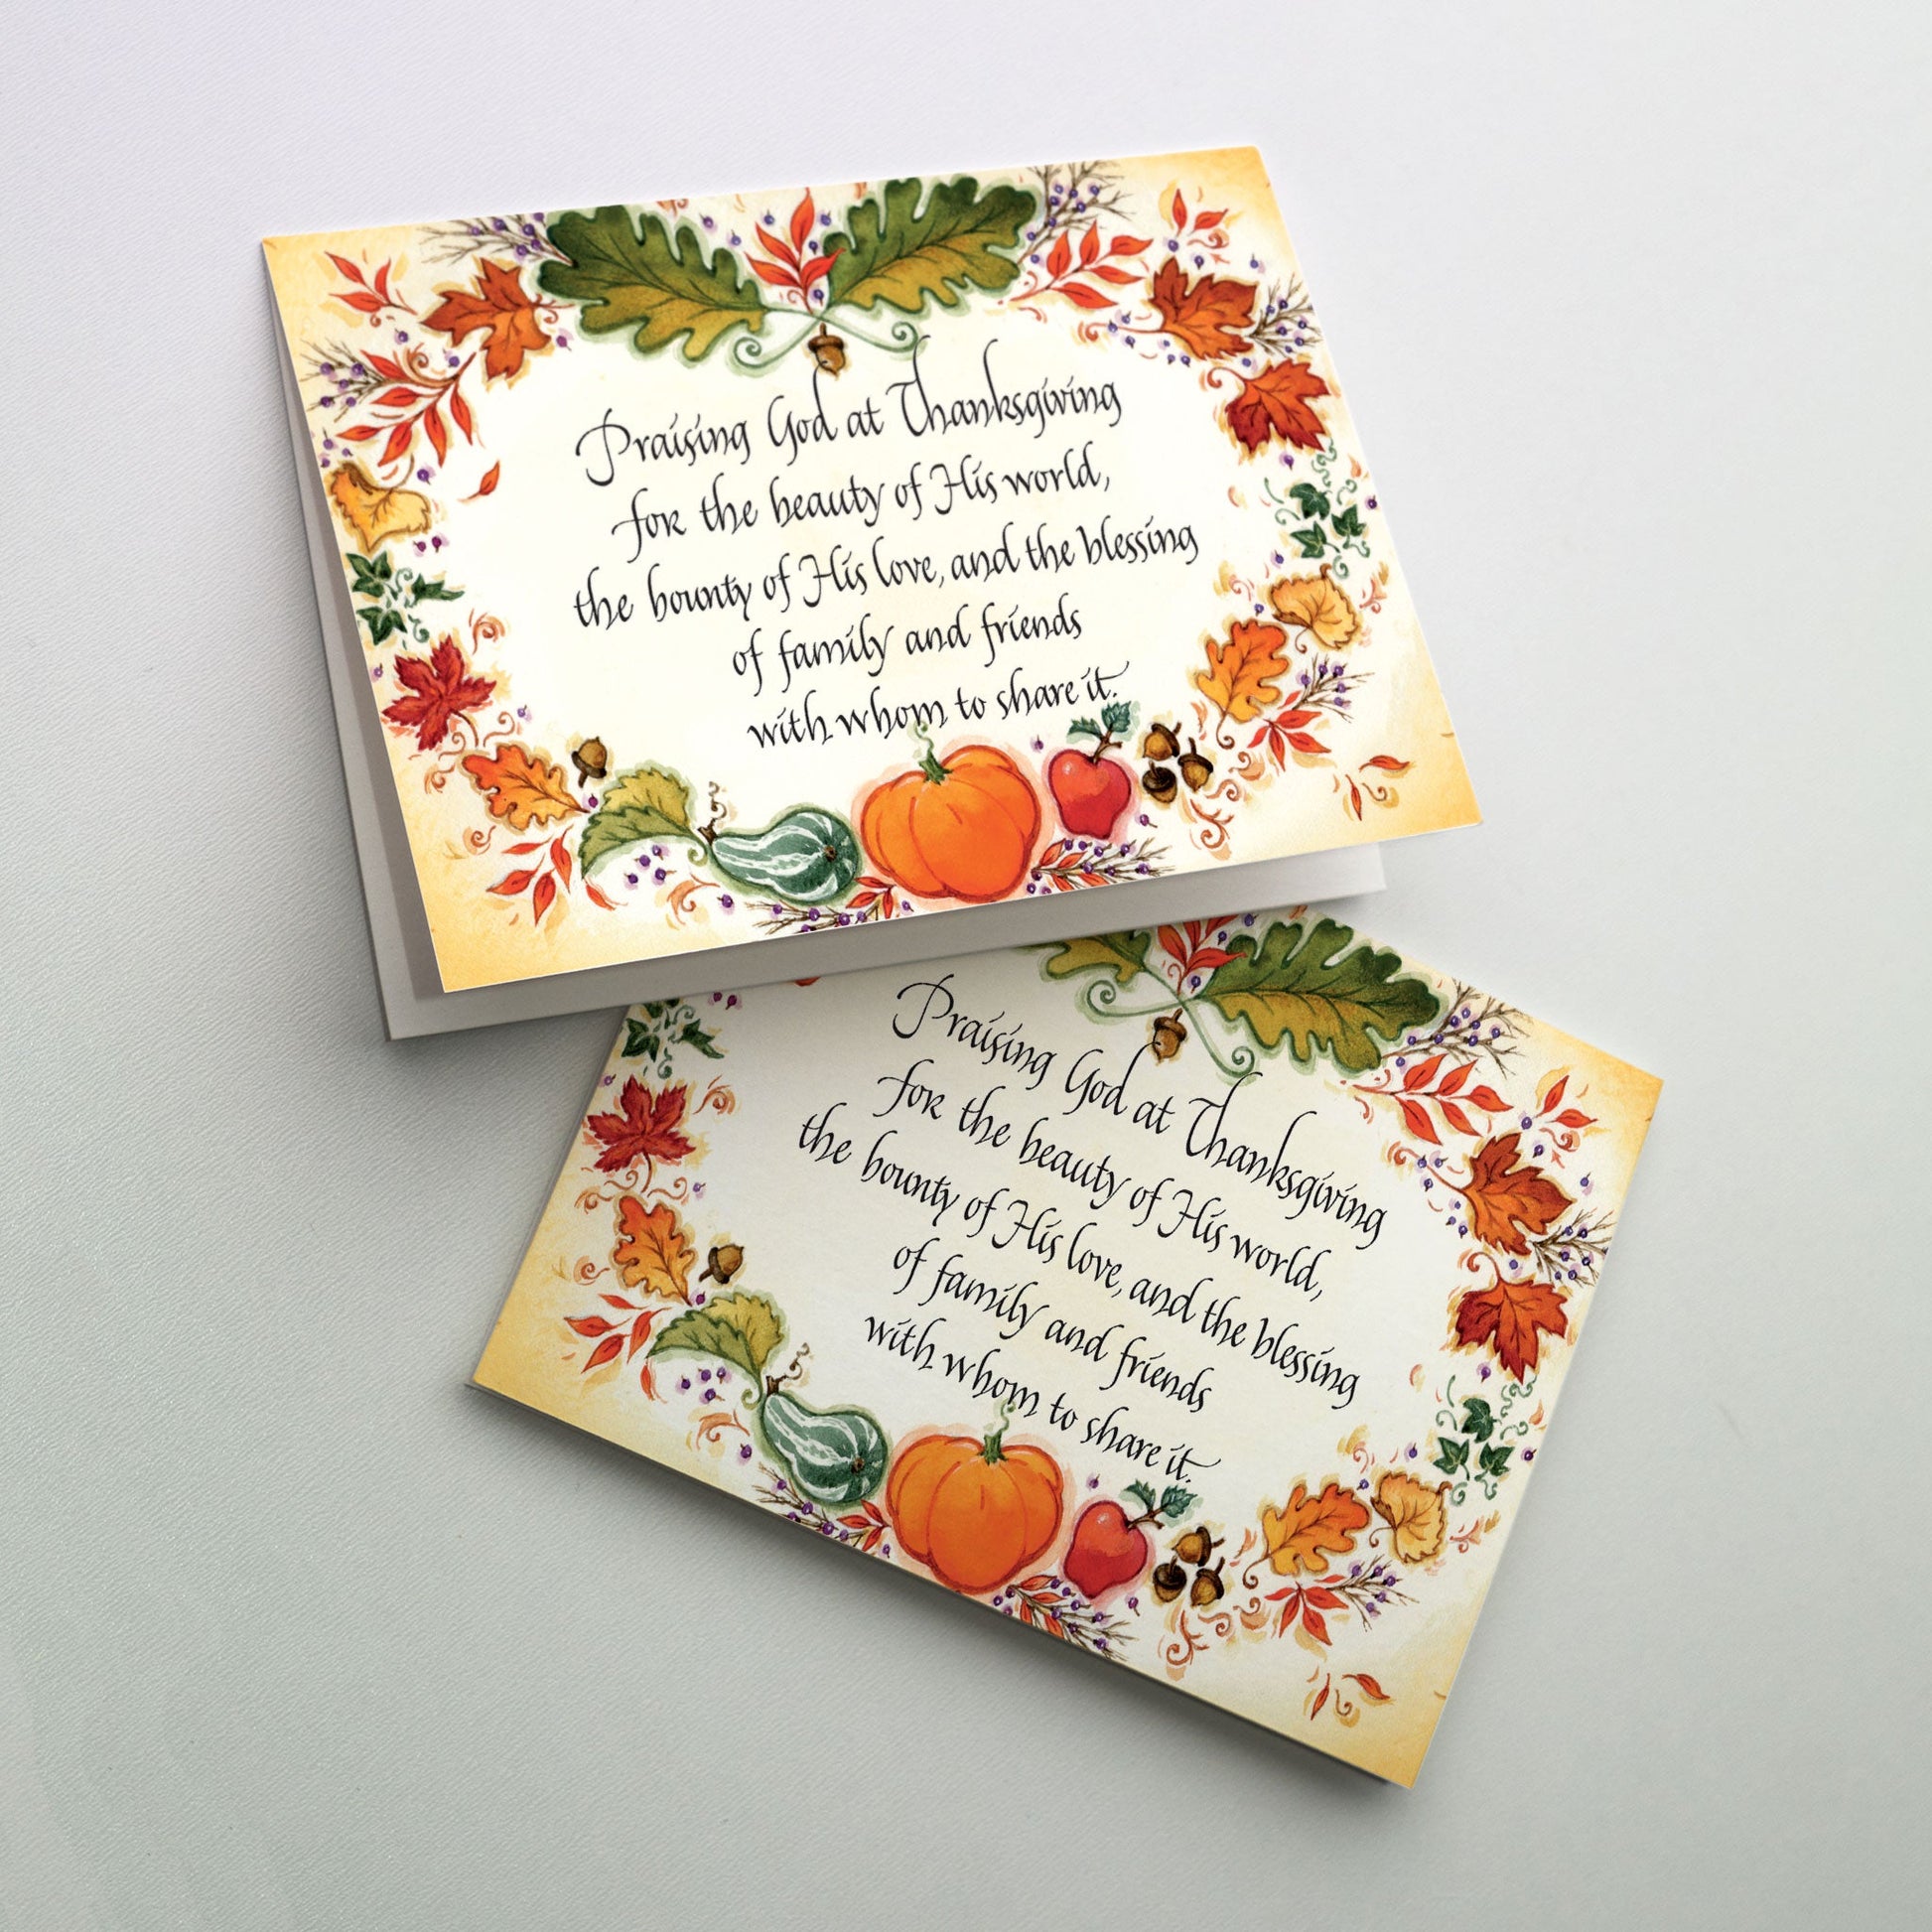 Heart-shaped border of fall fruits and leaves creating a frame for the cover message.